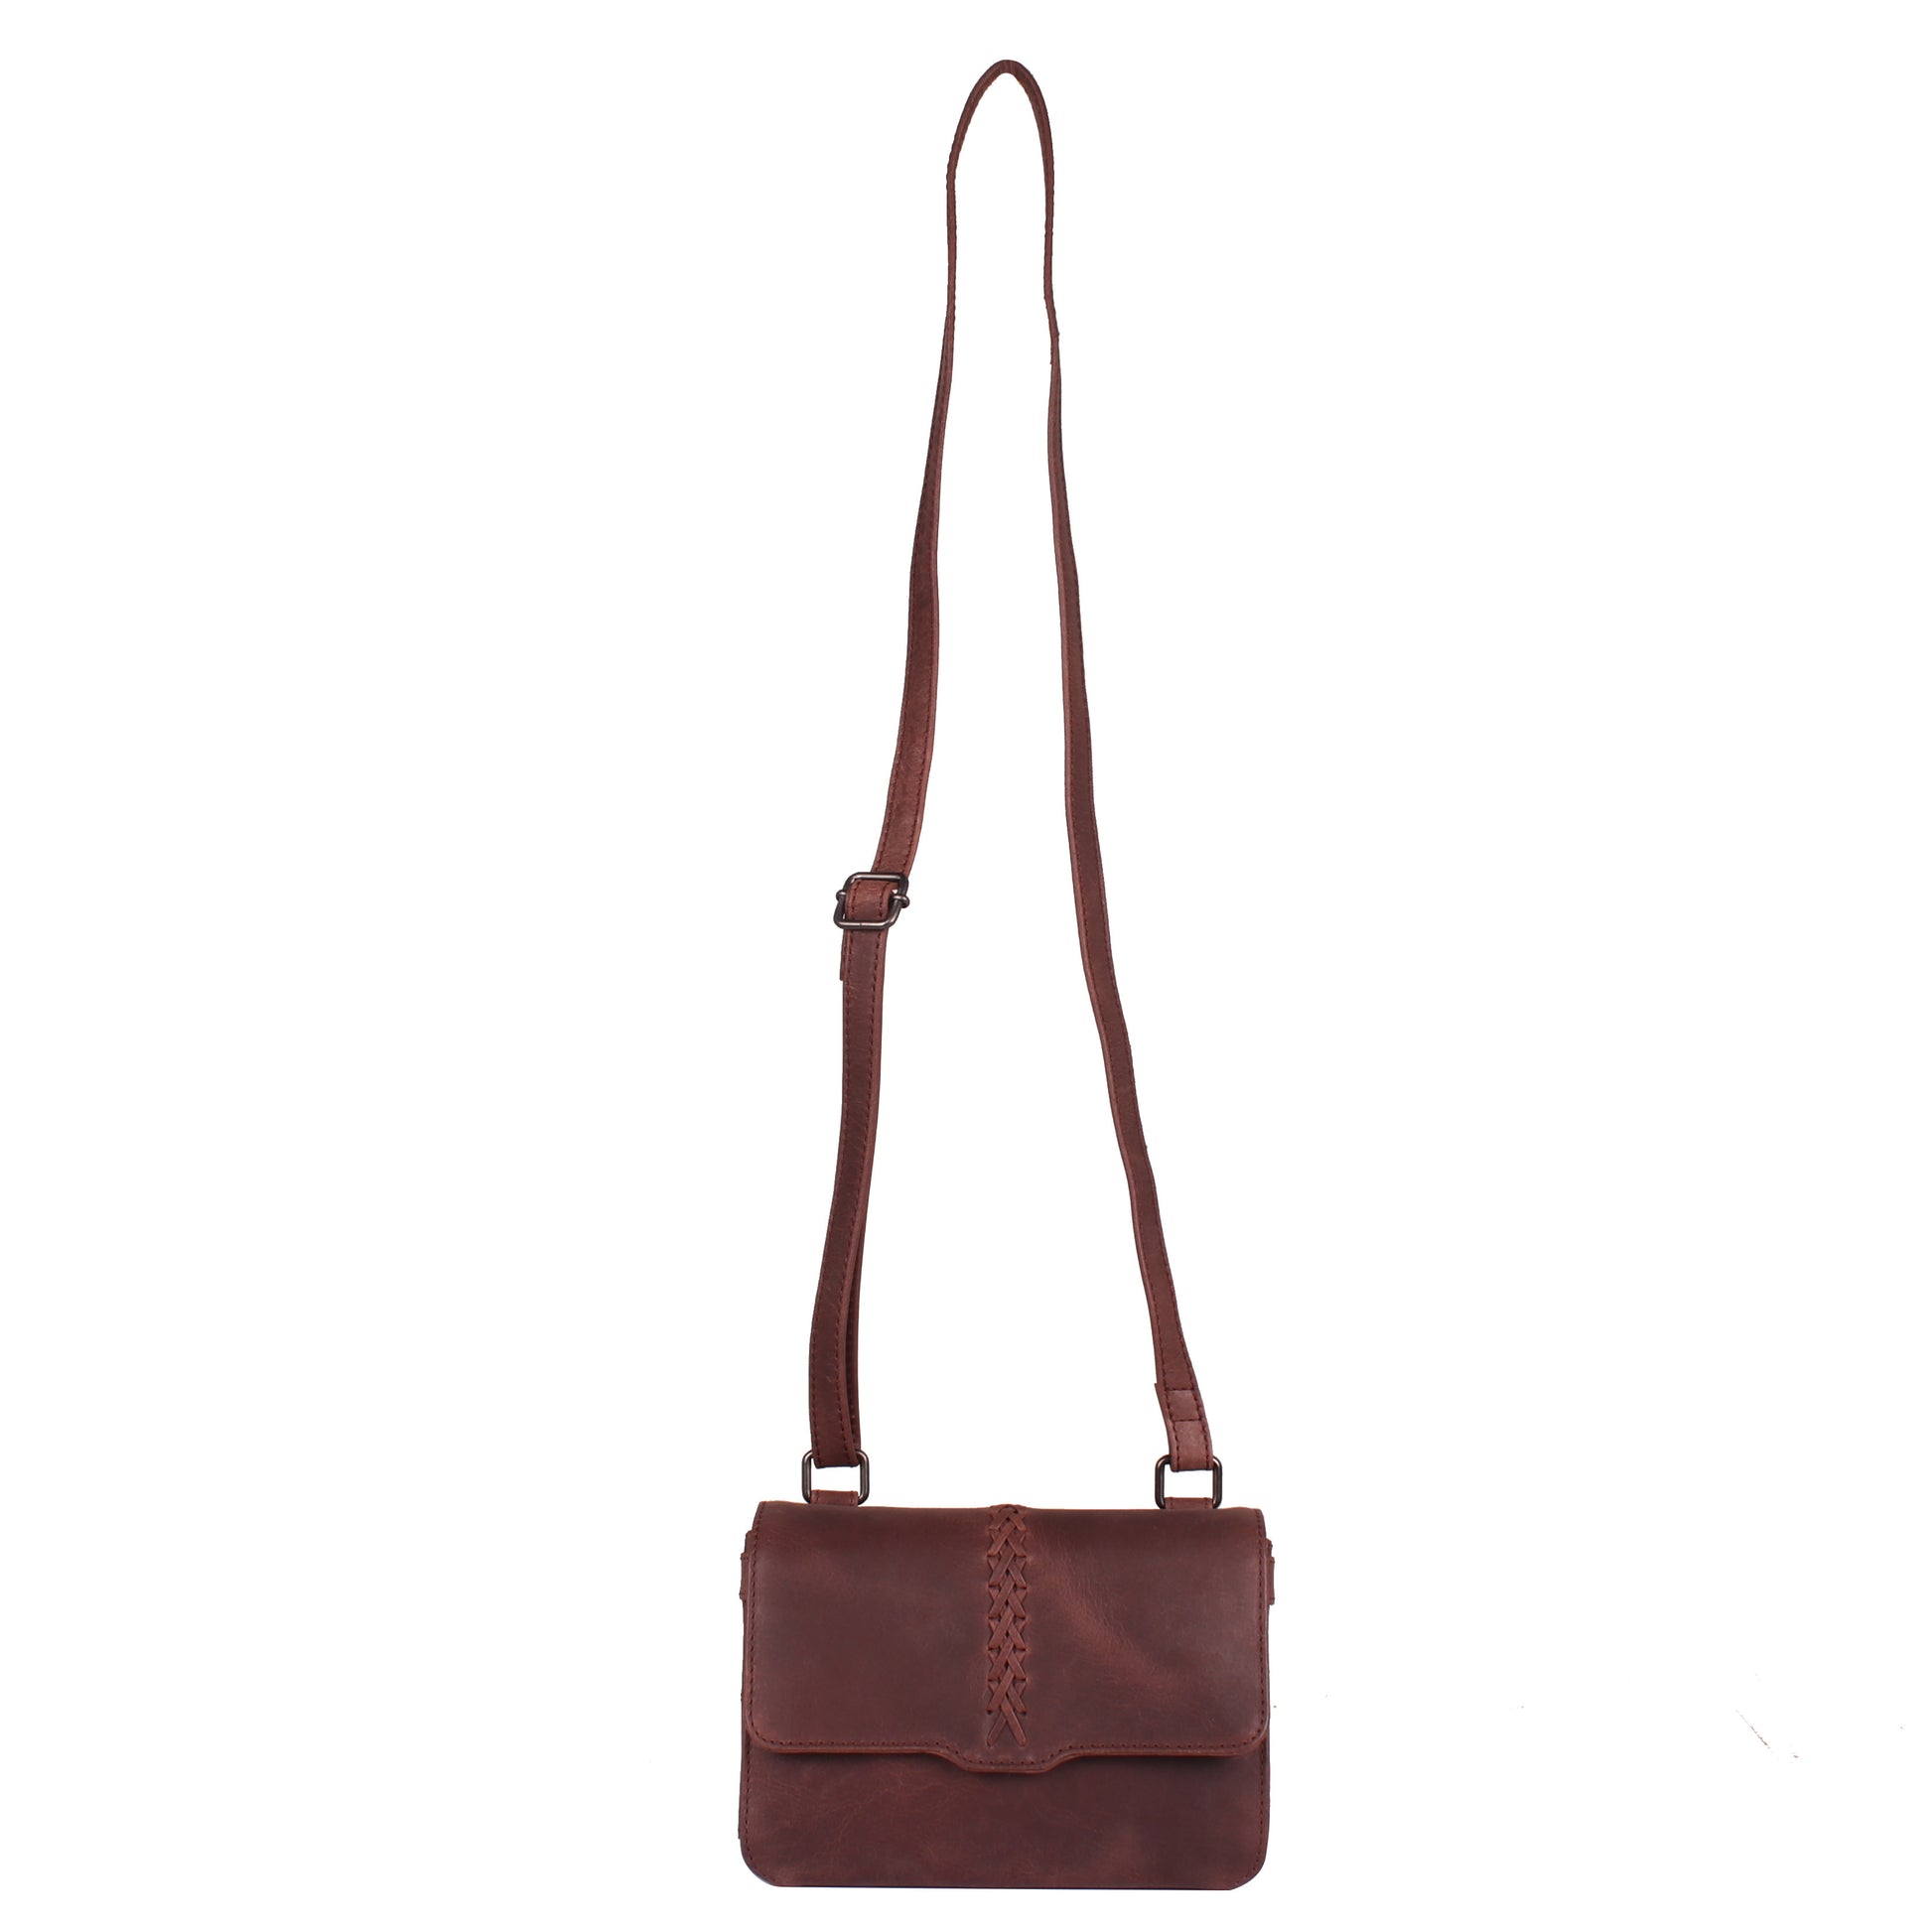 Kailey Leather Purse Pack | Conceal Carry for Women Mahogany